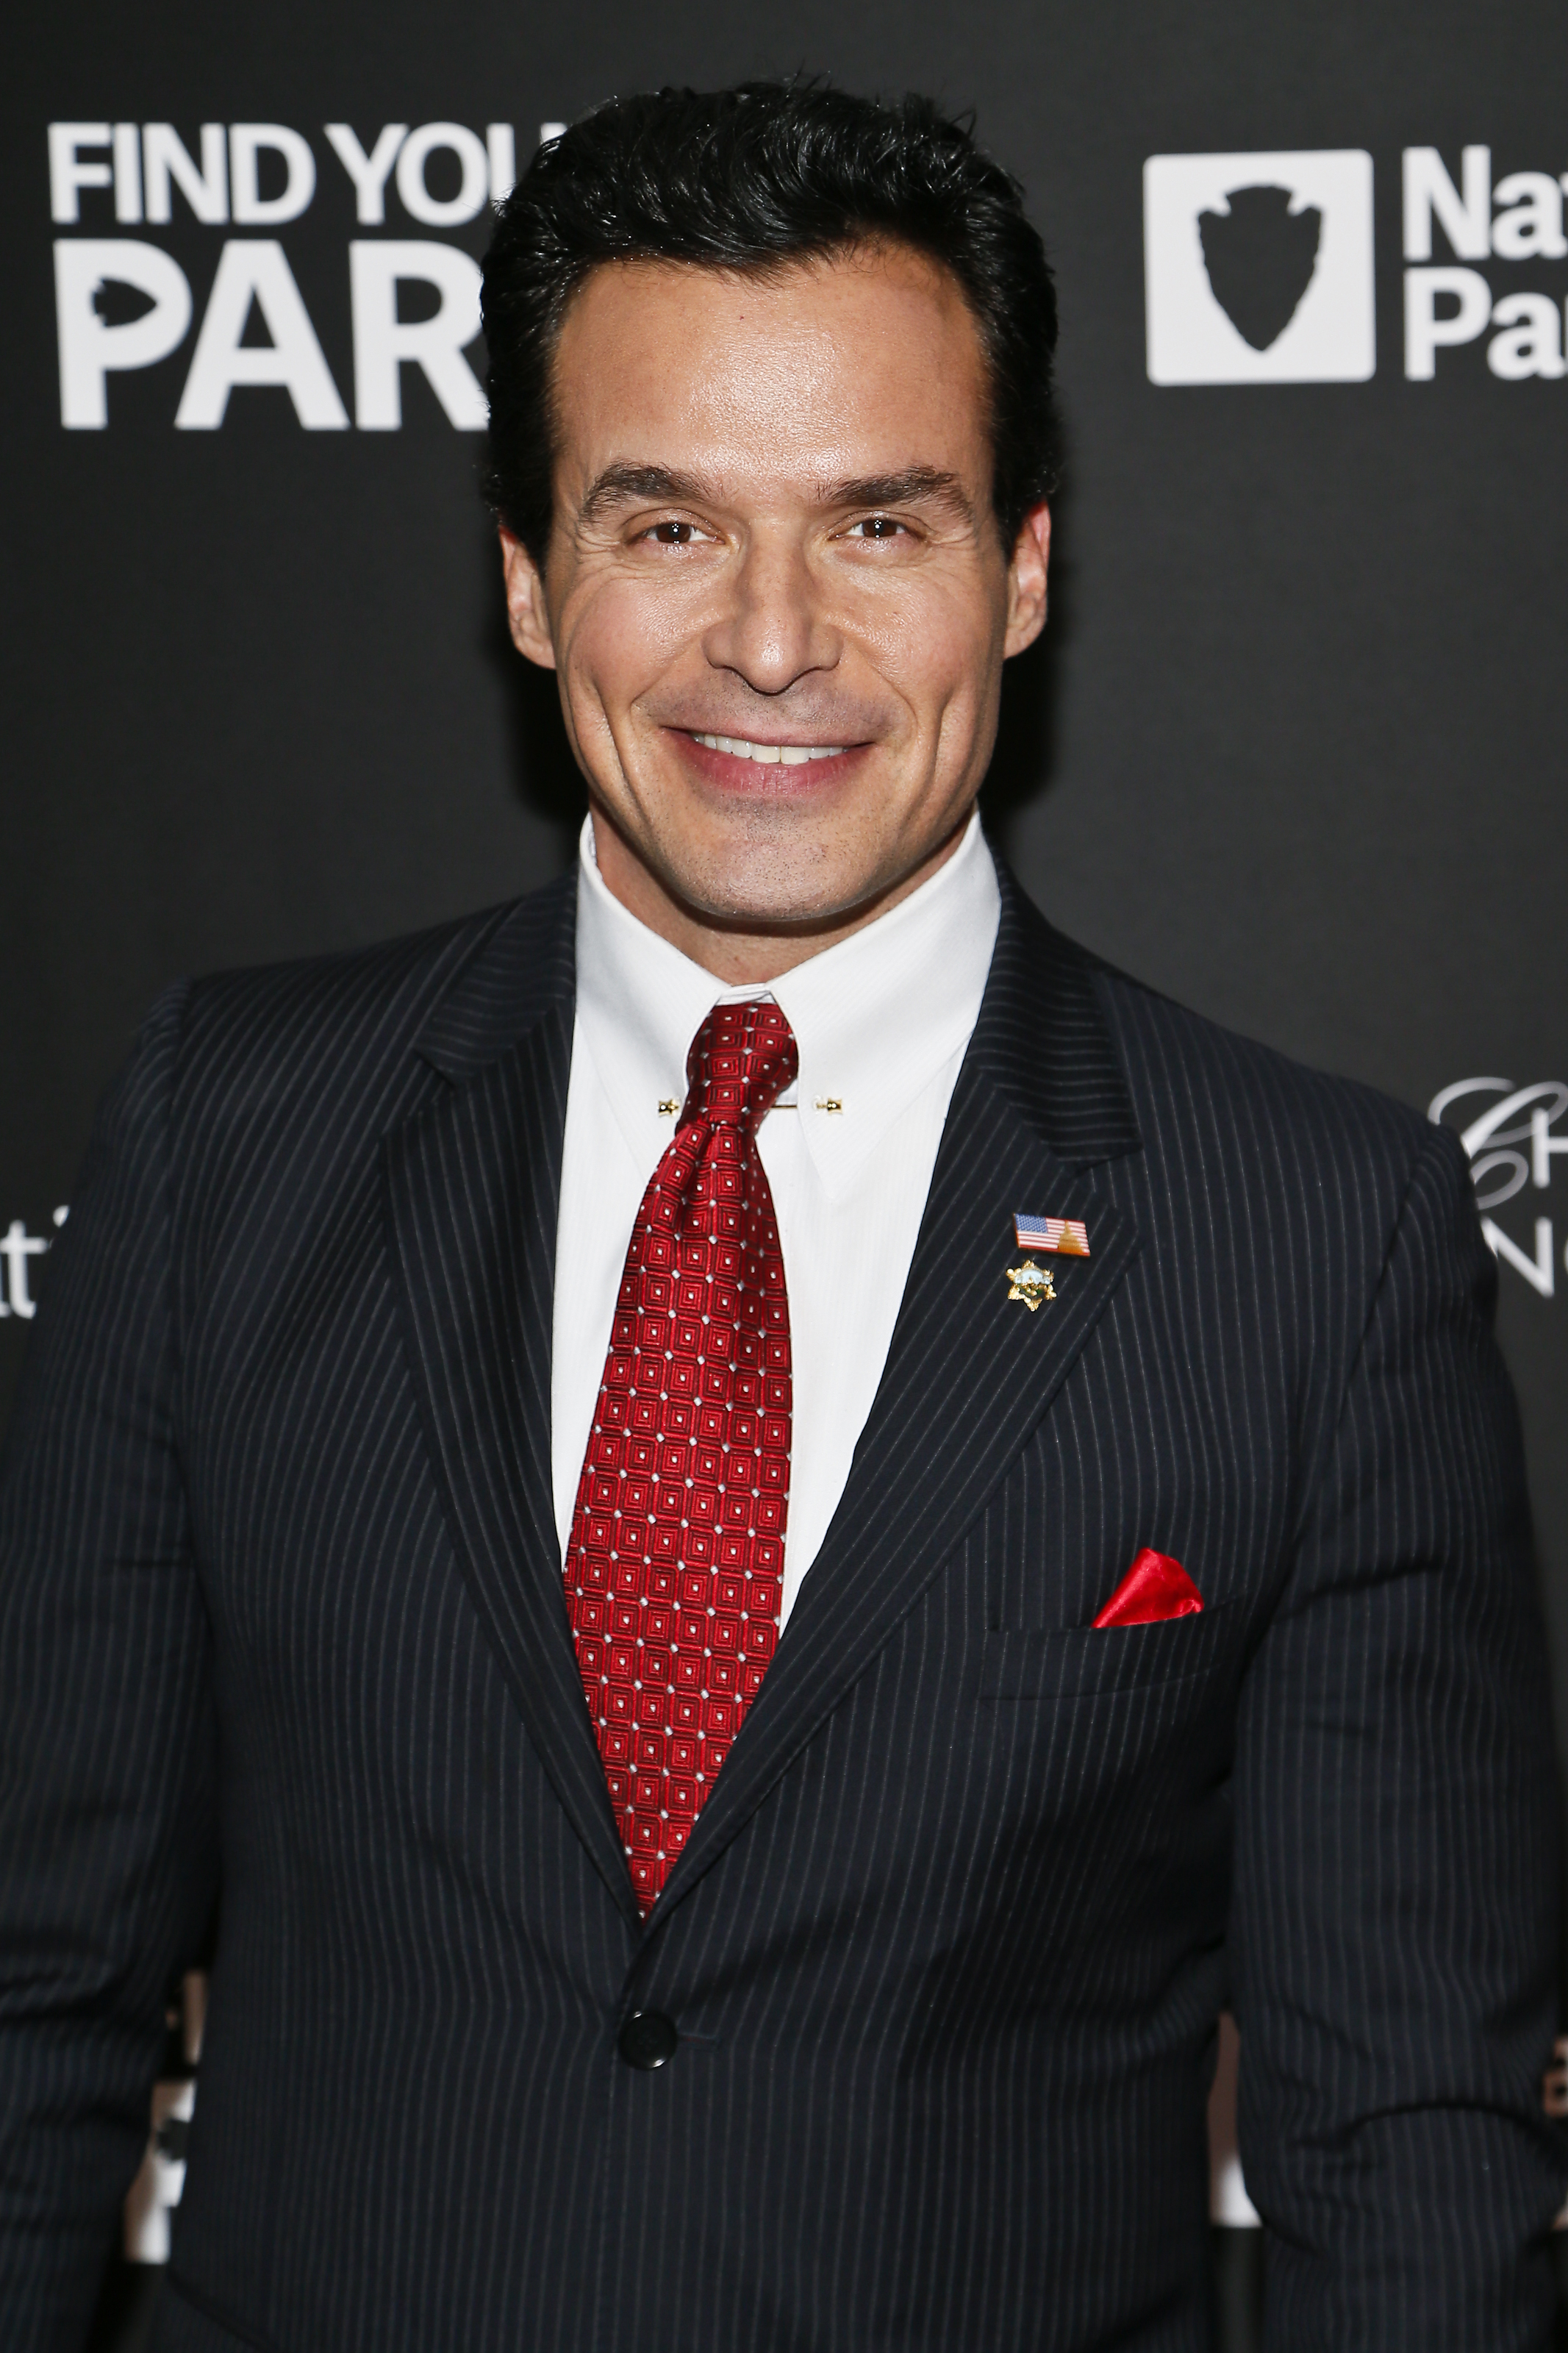 Antonio in pin-striped suit with patterned red tie and lapel pin smiles at a media event